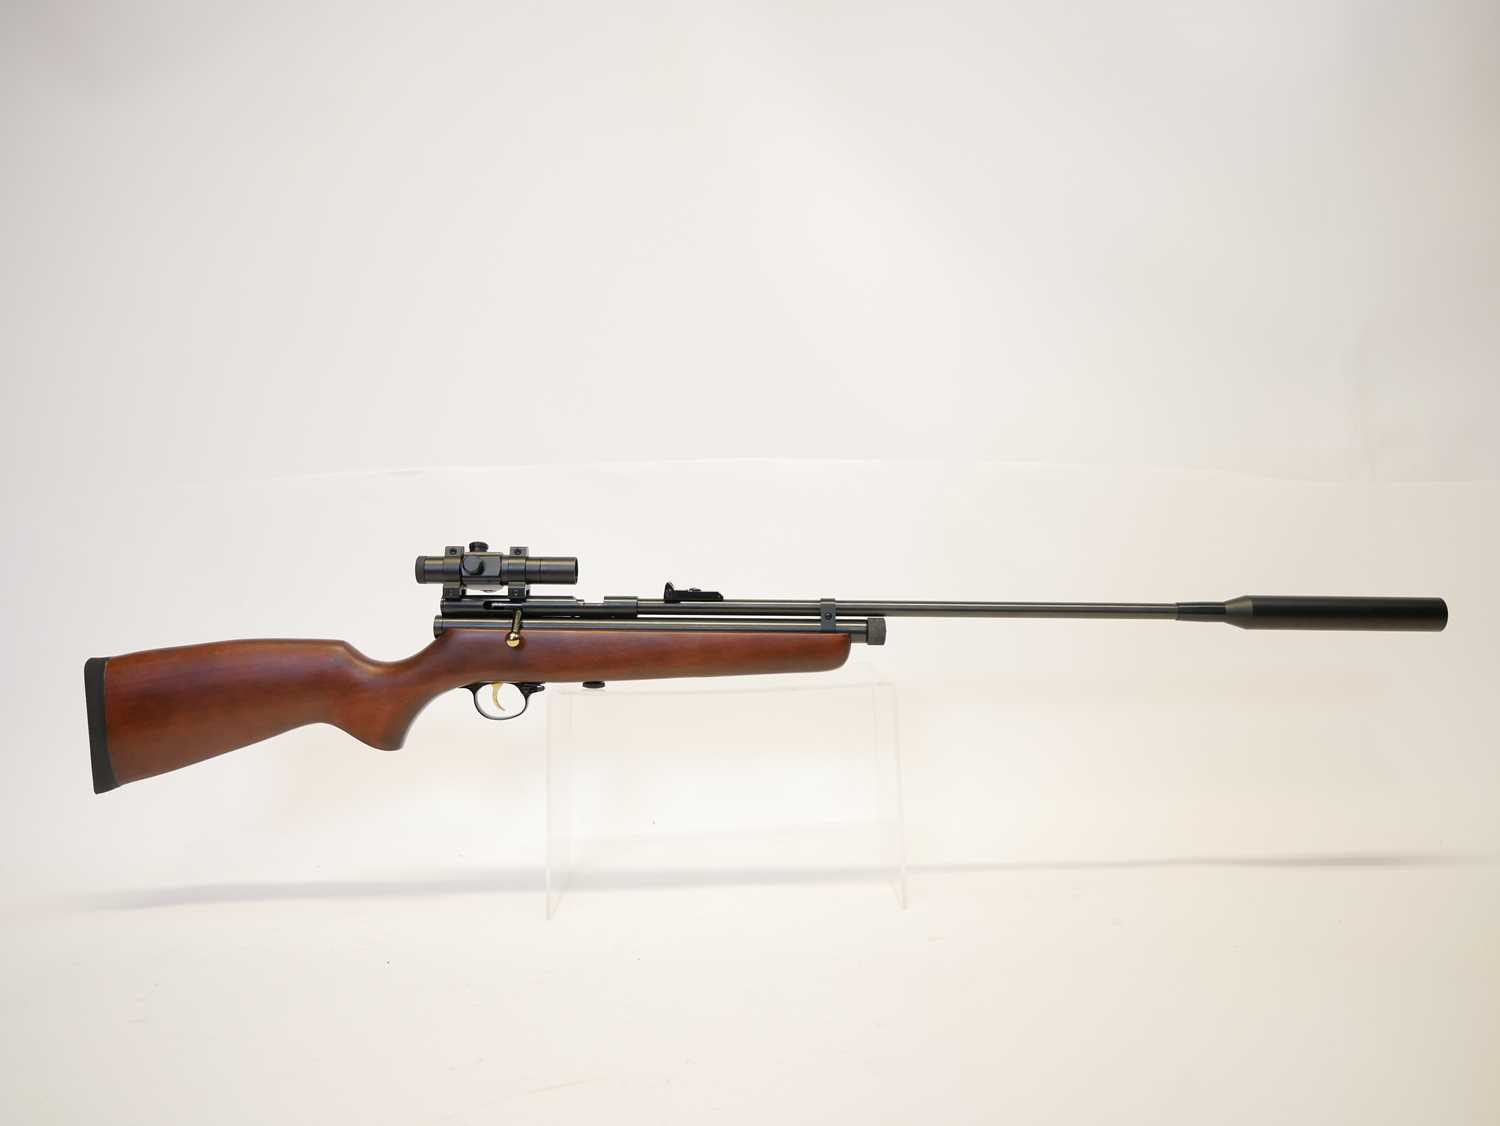 SMK QB78DL .22 CO2 air rifle, 29inch barrel including the fitted moderator, fitted with Hawke scope, - Image 2 of 12